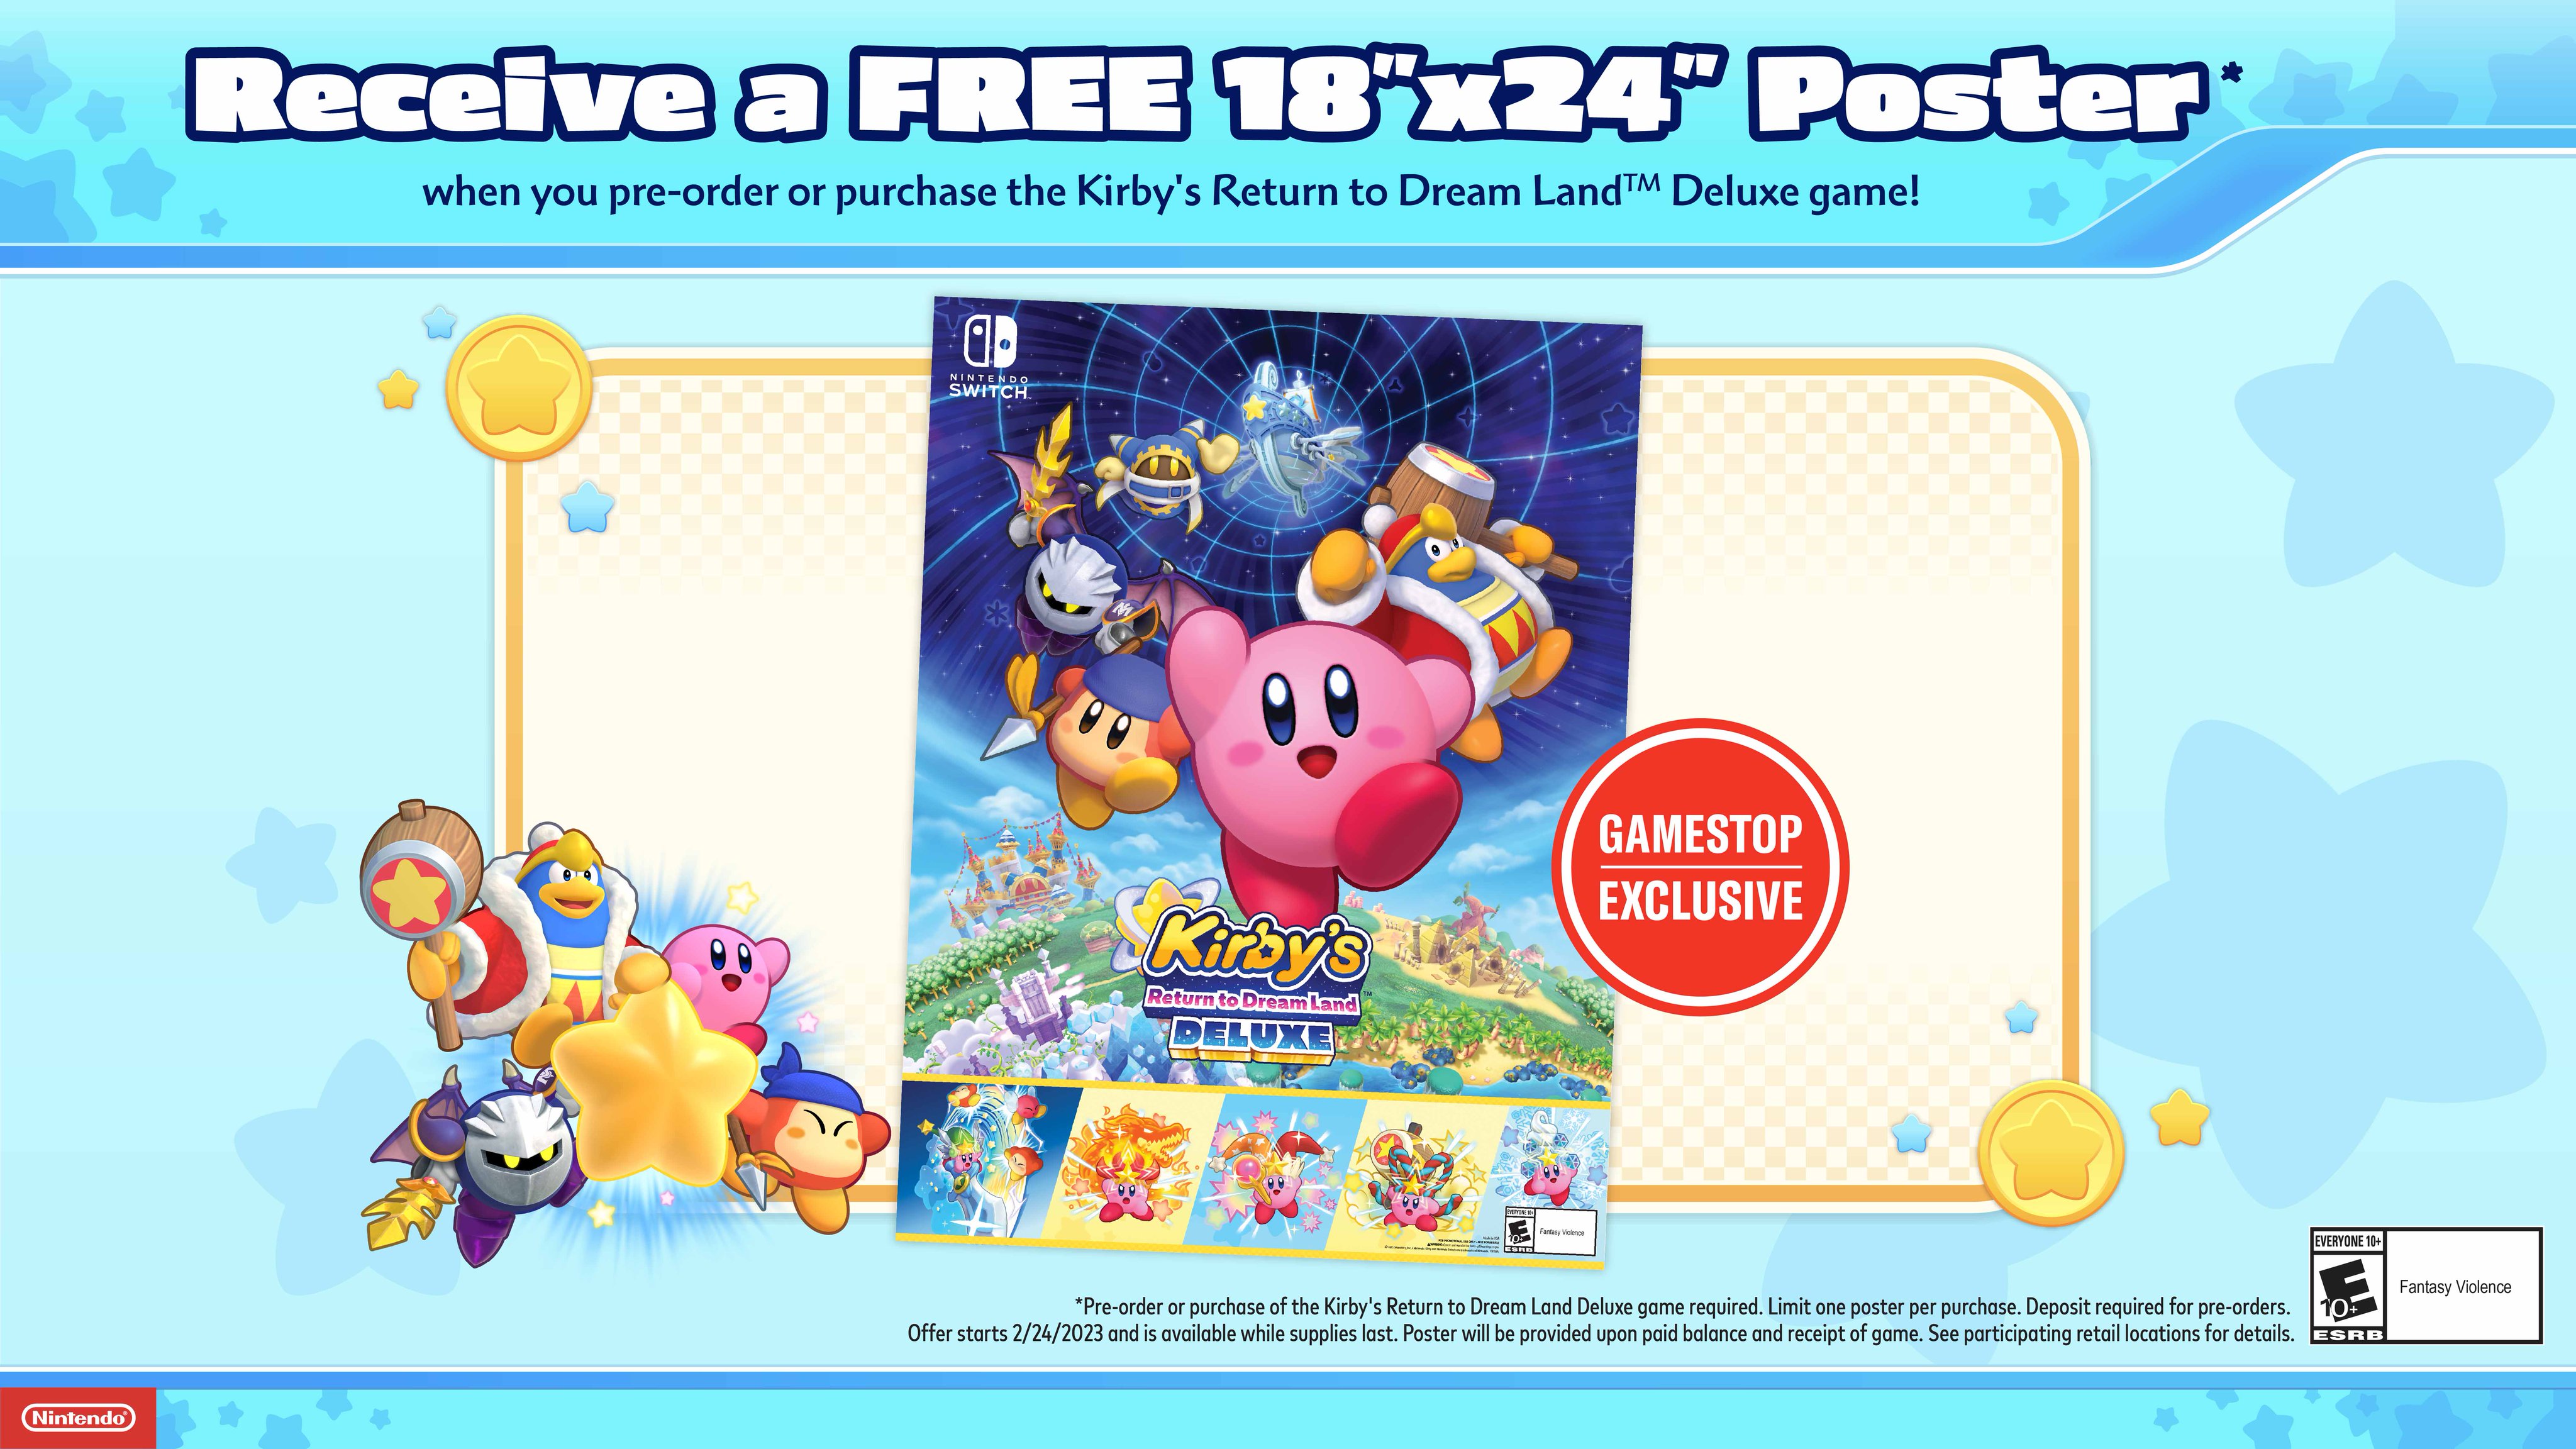 Kirby's Return To Dream Land Deluxe - 15 Things To Know Before You Buy 